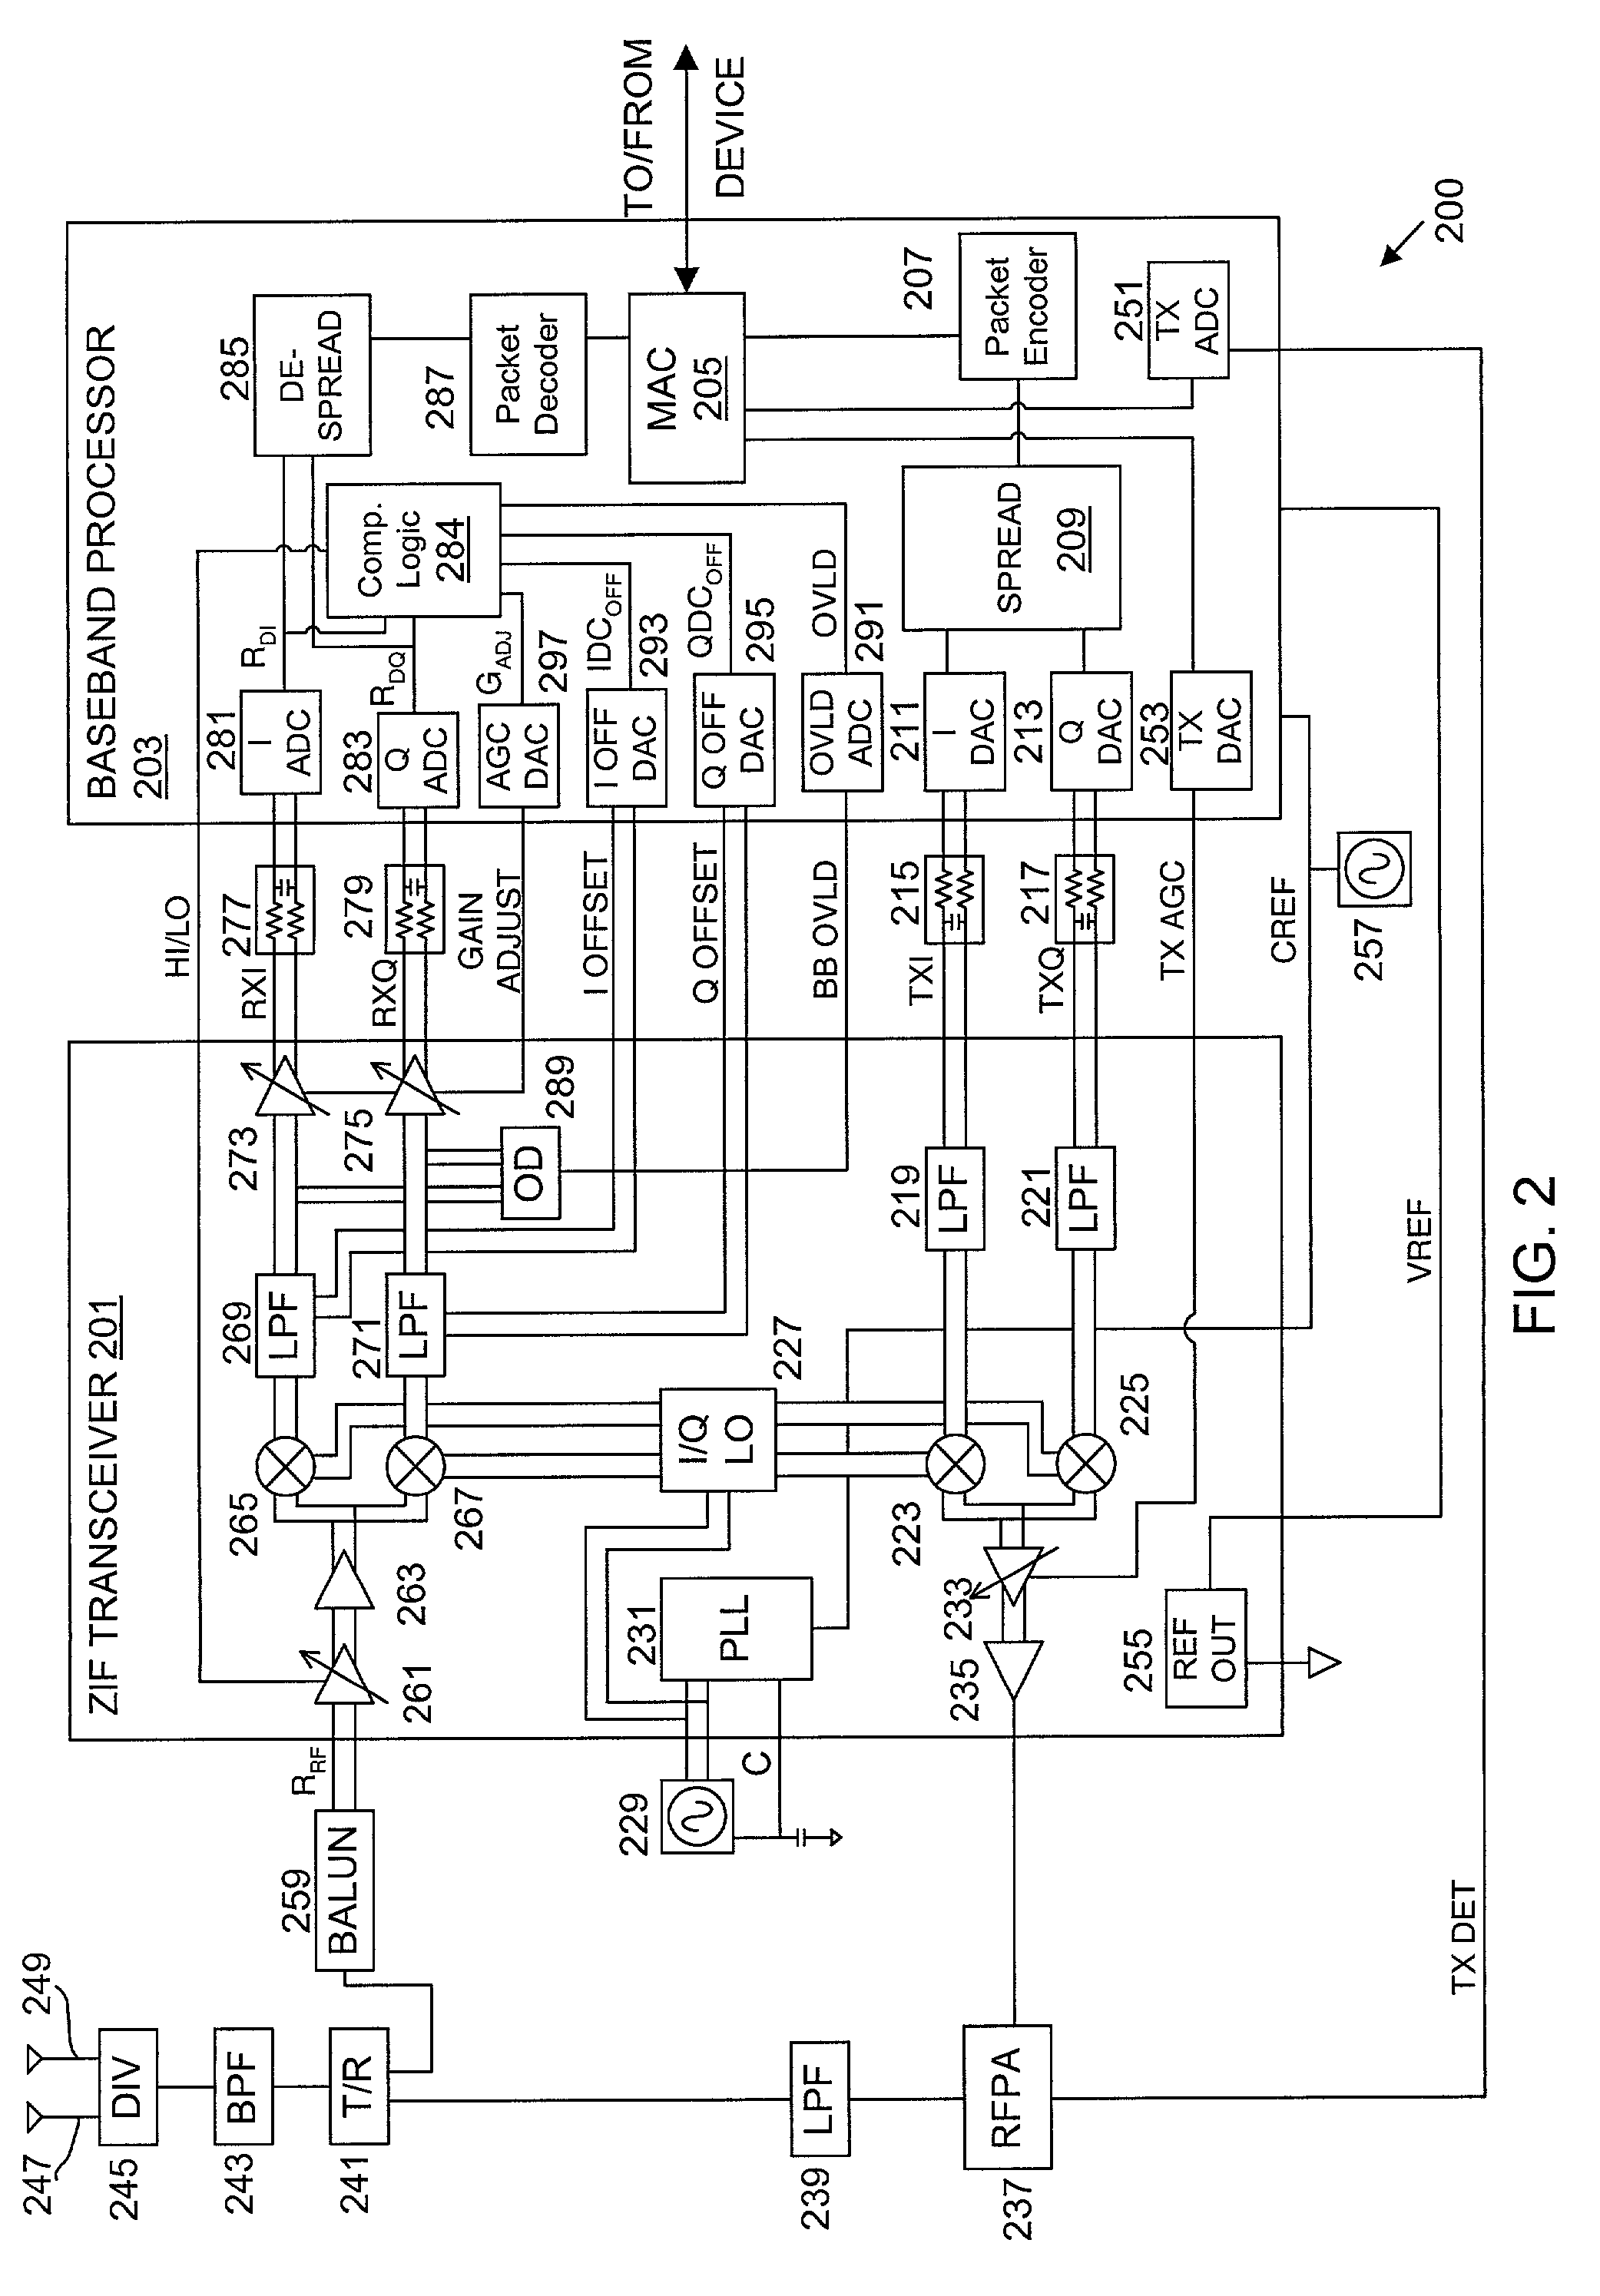 Packet acquisition and channel tracking for a wireless communication device configured in a zero intermediate frequency architecture